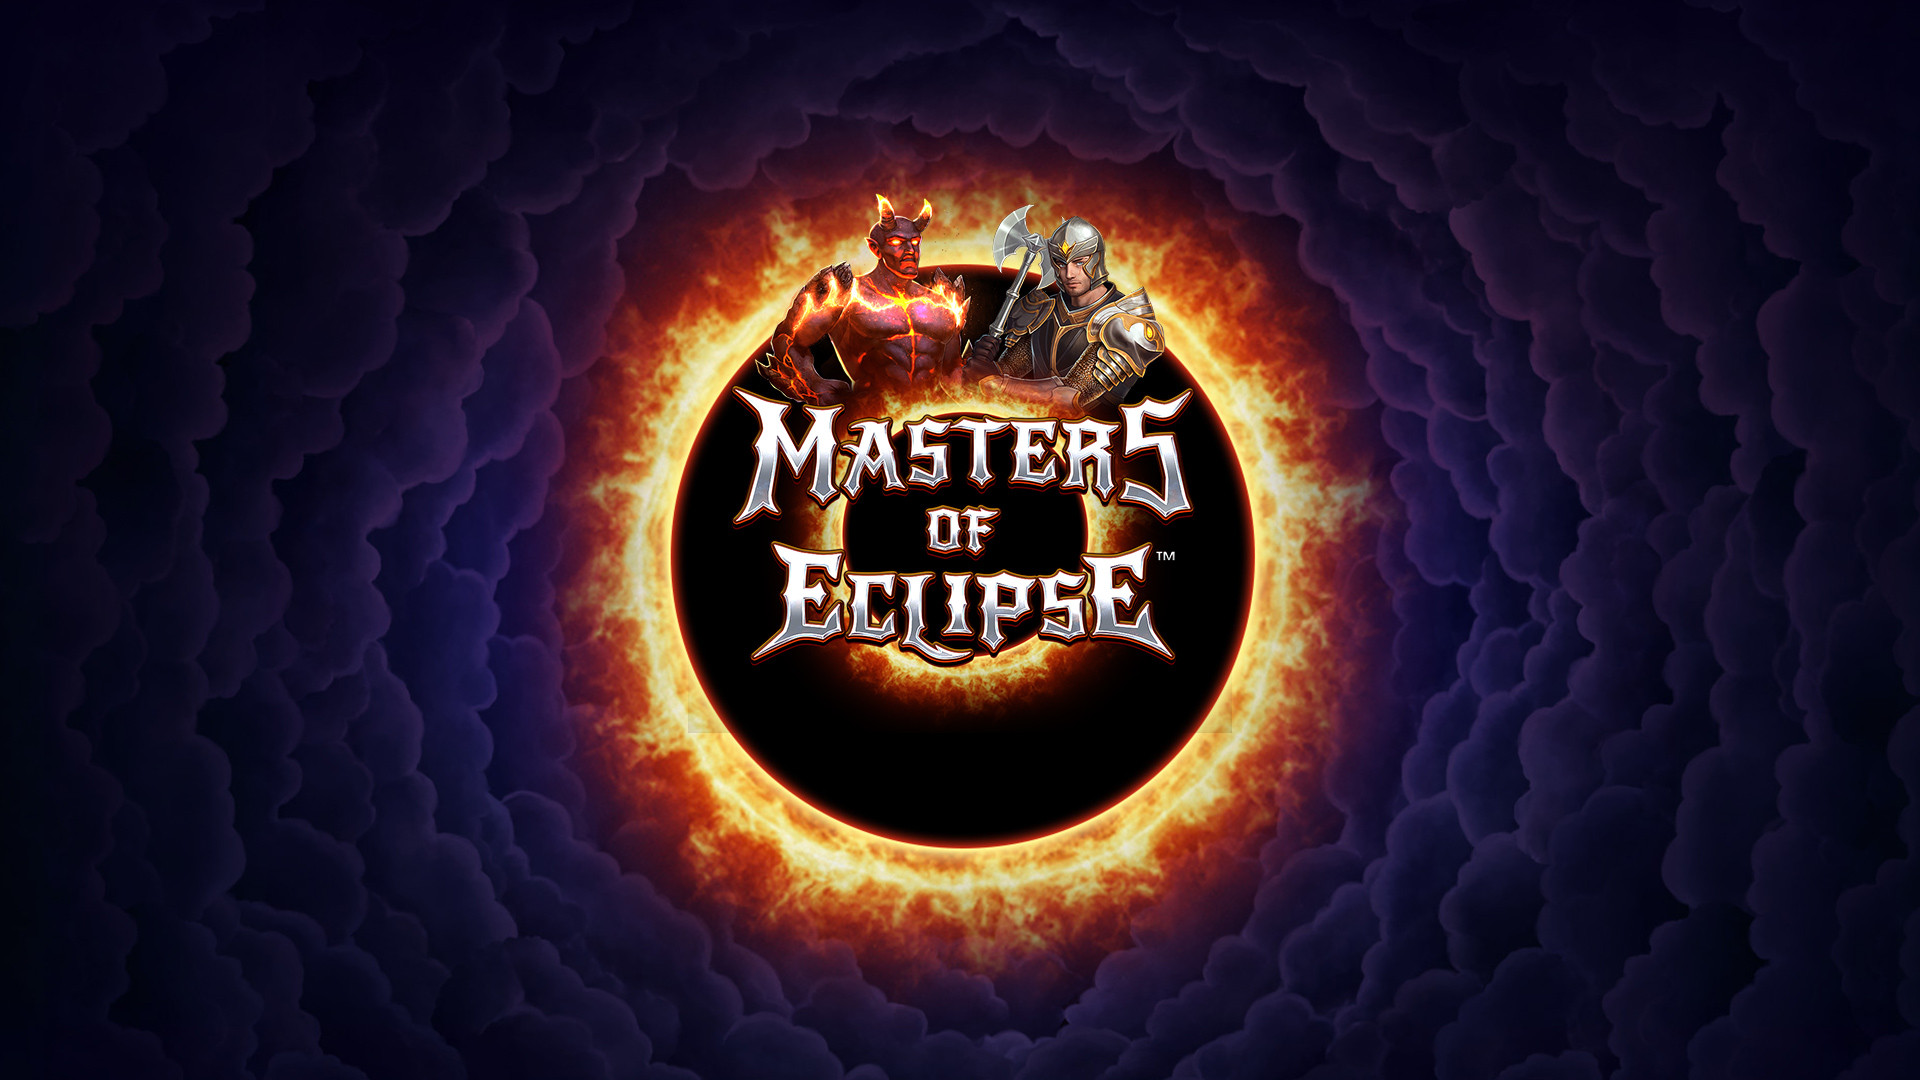 Masters of Eclipse